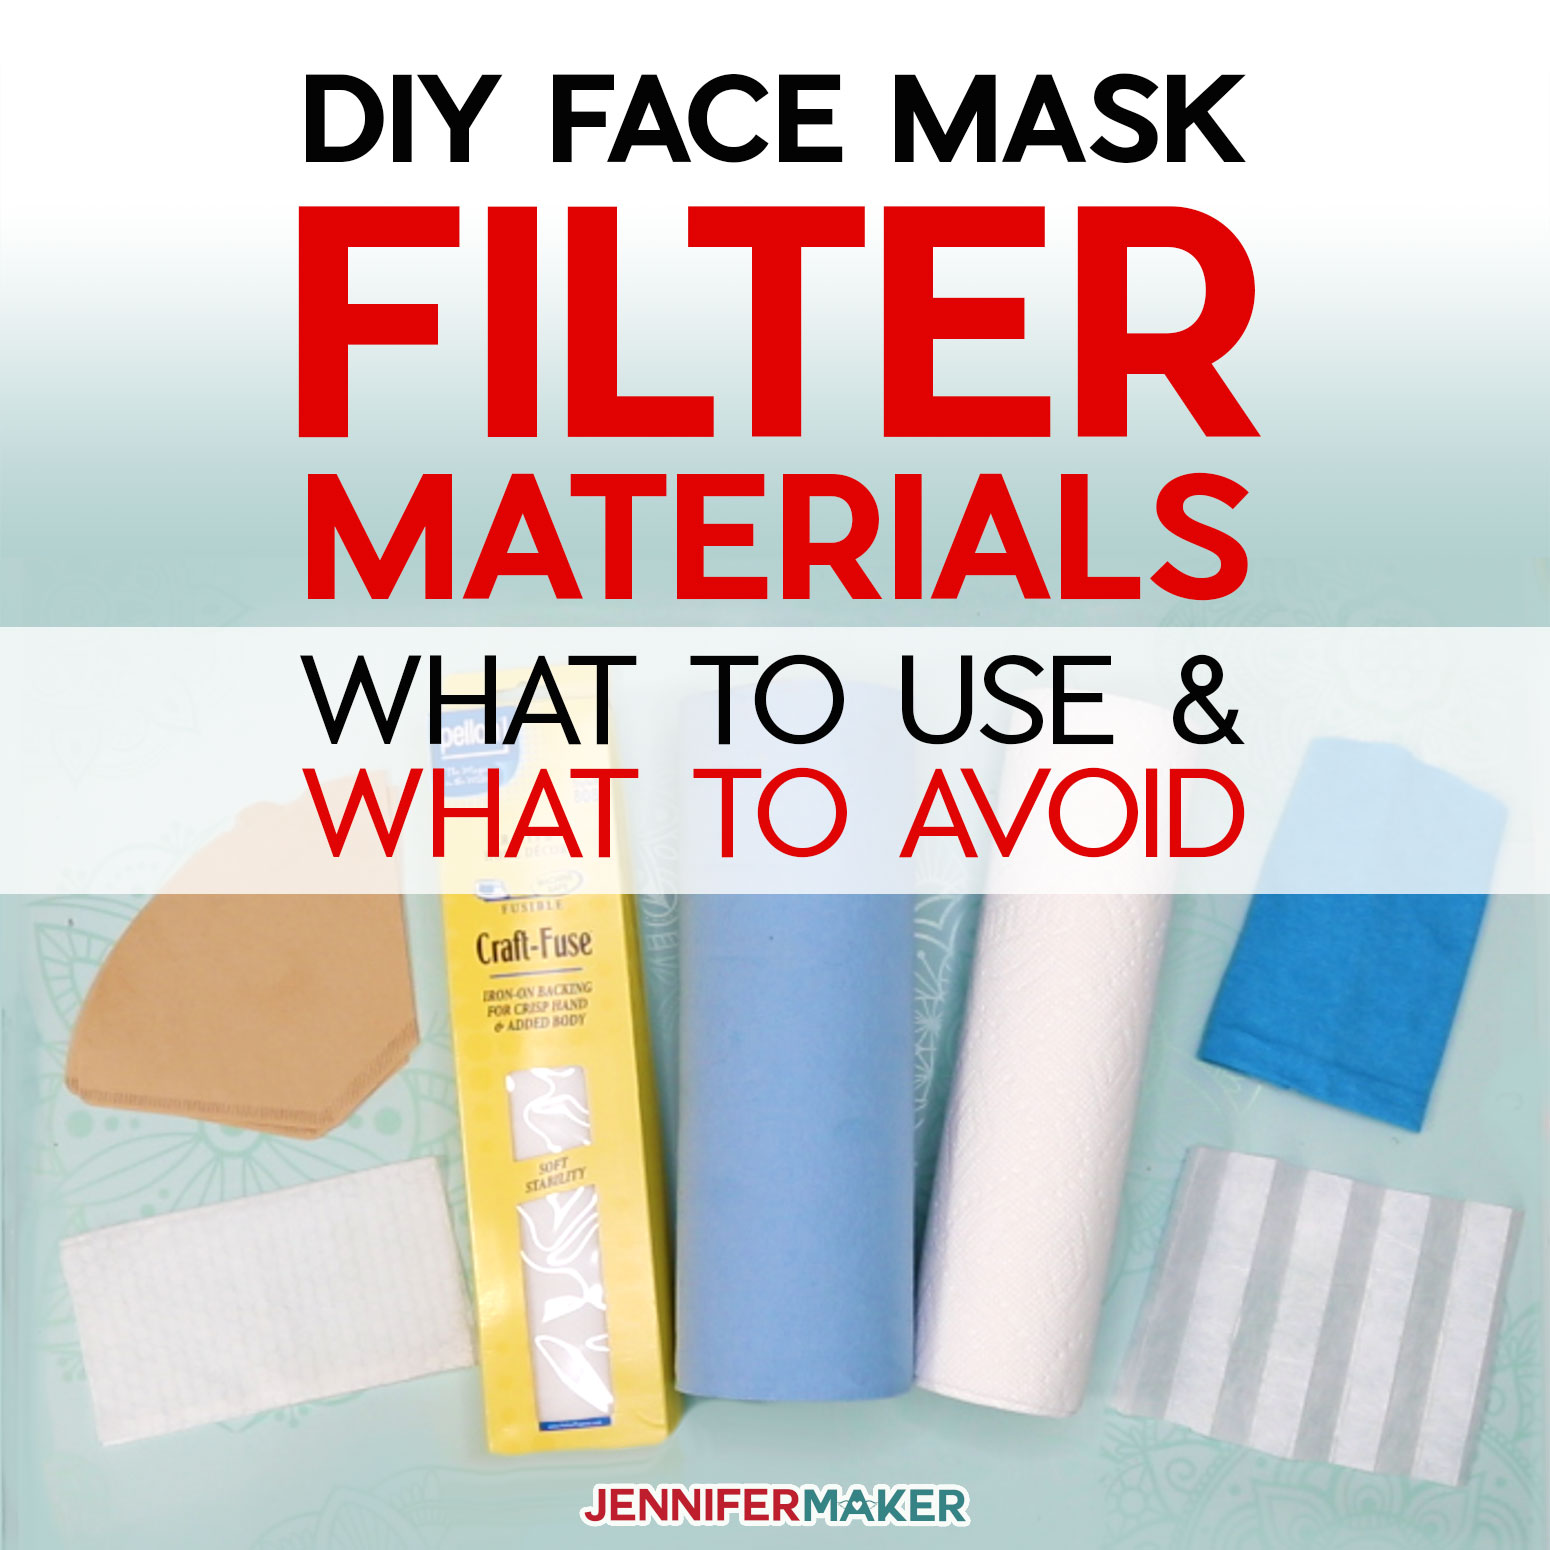 DIY Face Mask Filter Materials: What to Use, What to Avoid